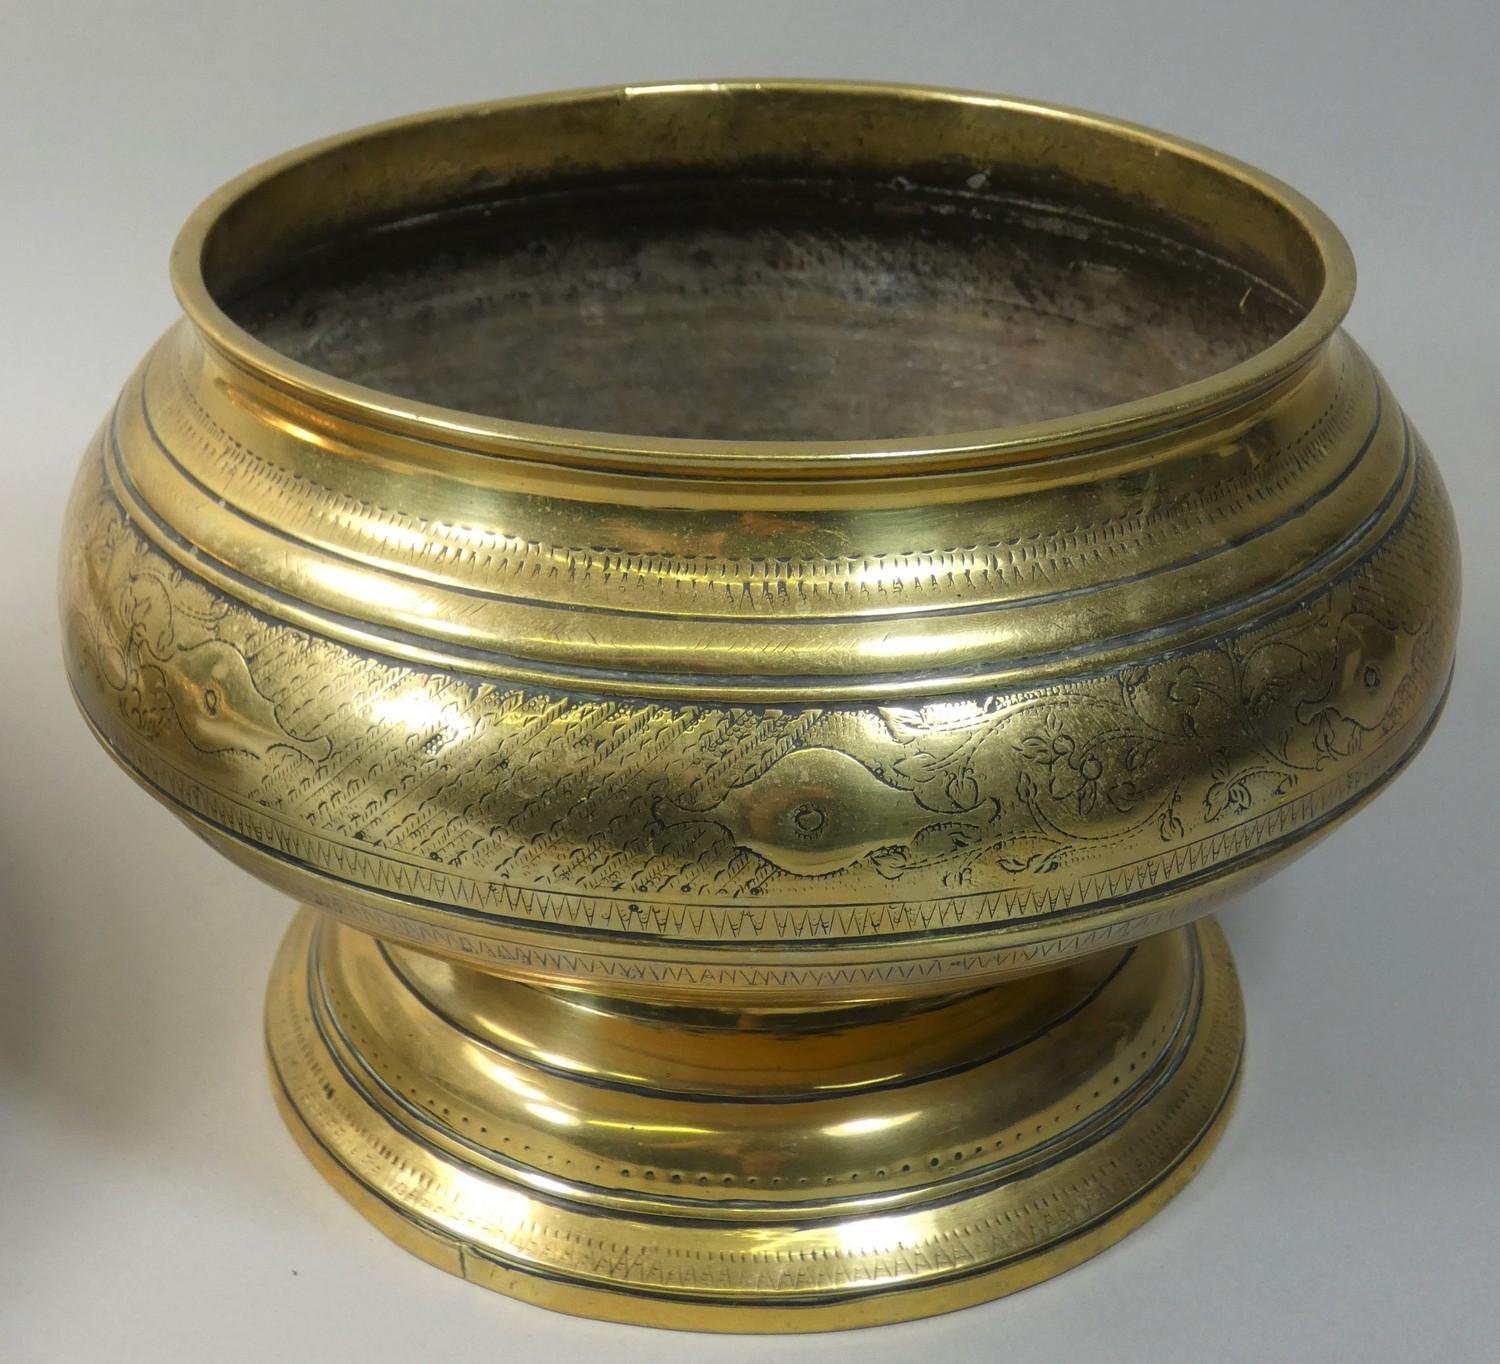 An Arts & Crafts brass and enamel pedestal bowl, with rope twist border, applied pale blue enamel - Image 3 of 3